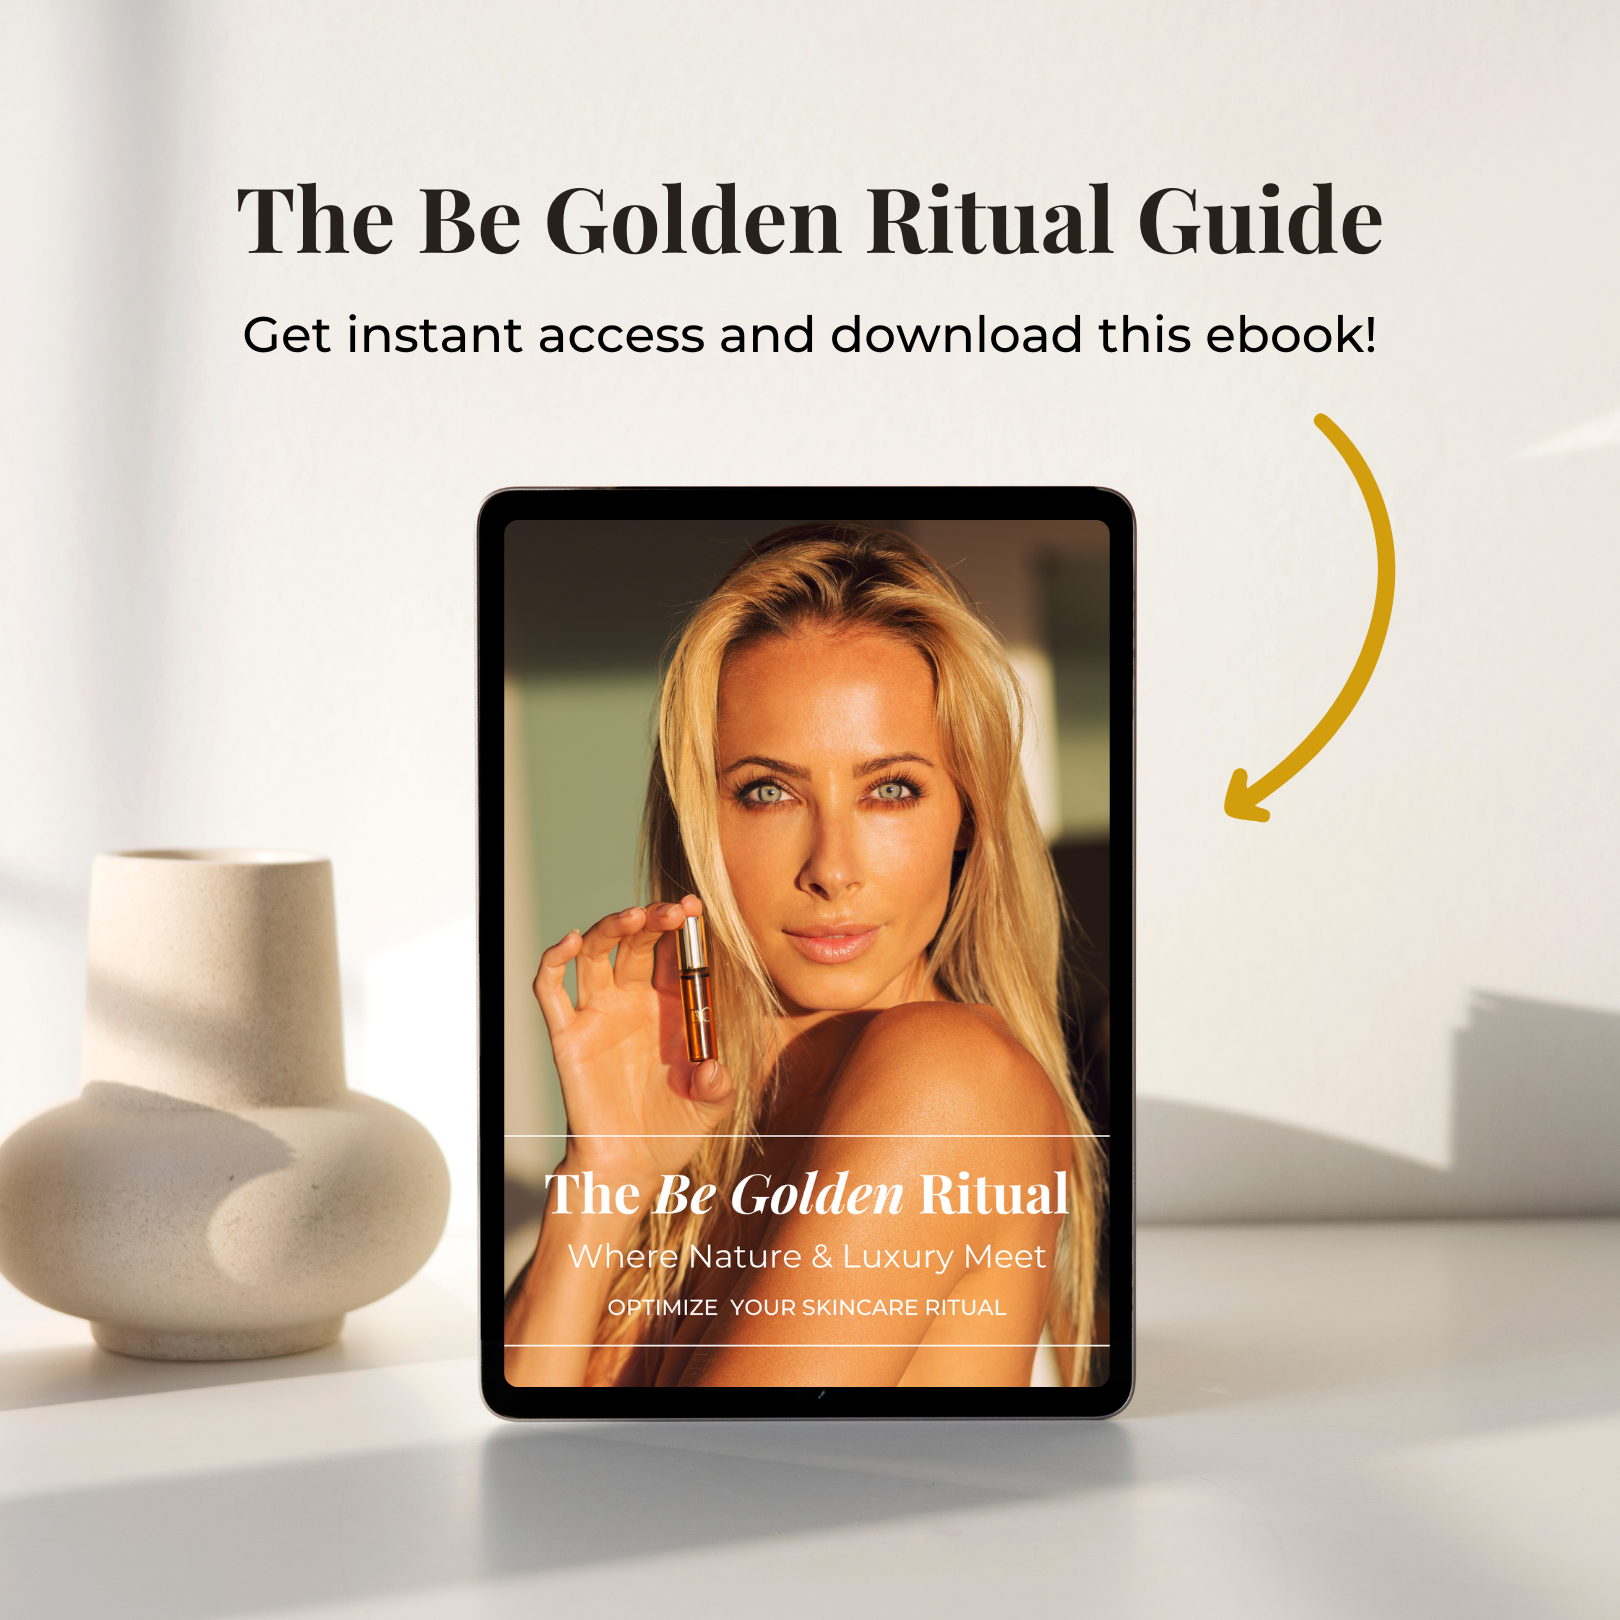 The Be Golden Ritual Guide